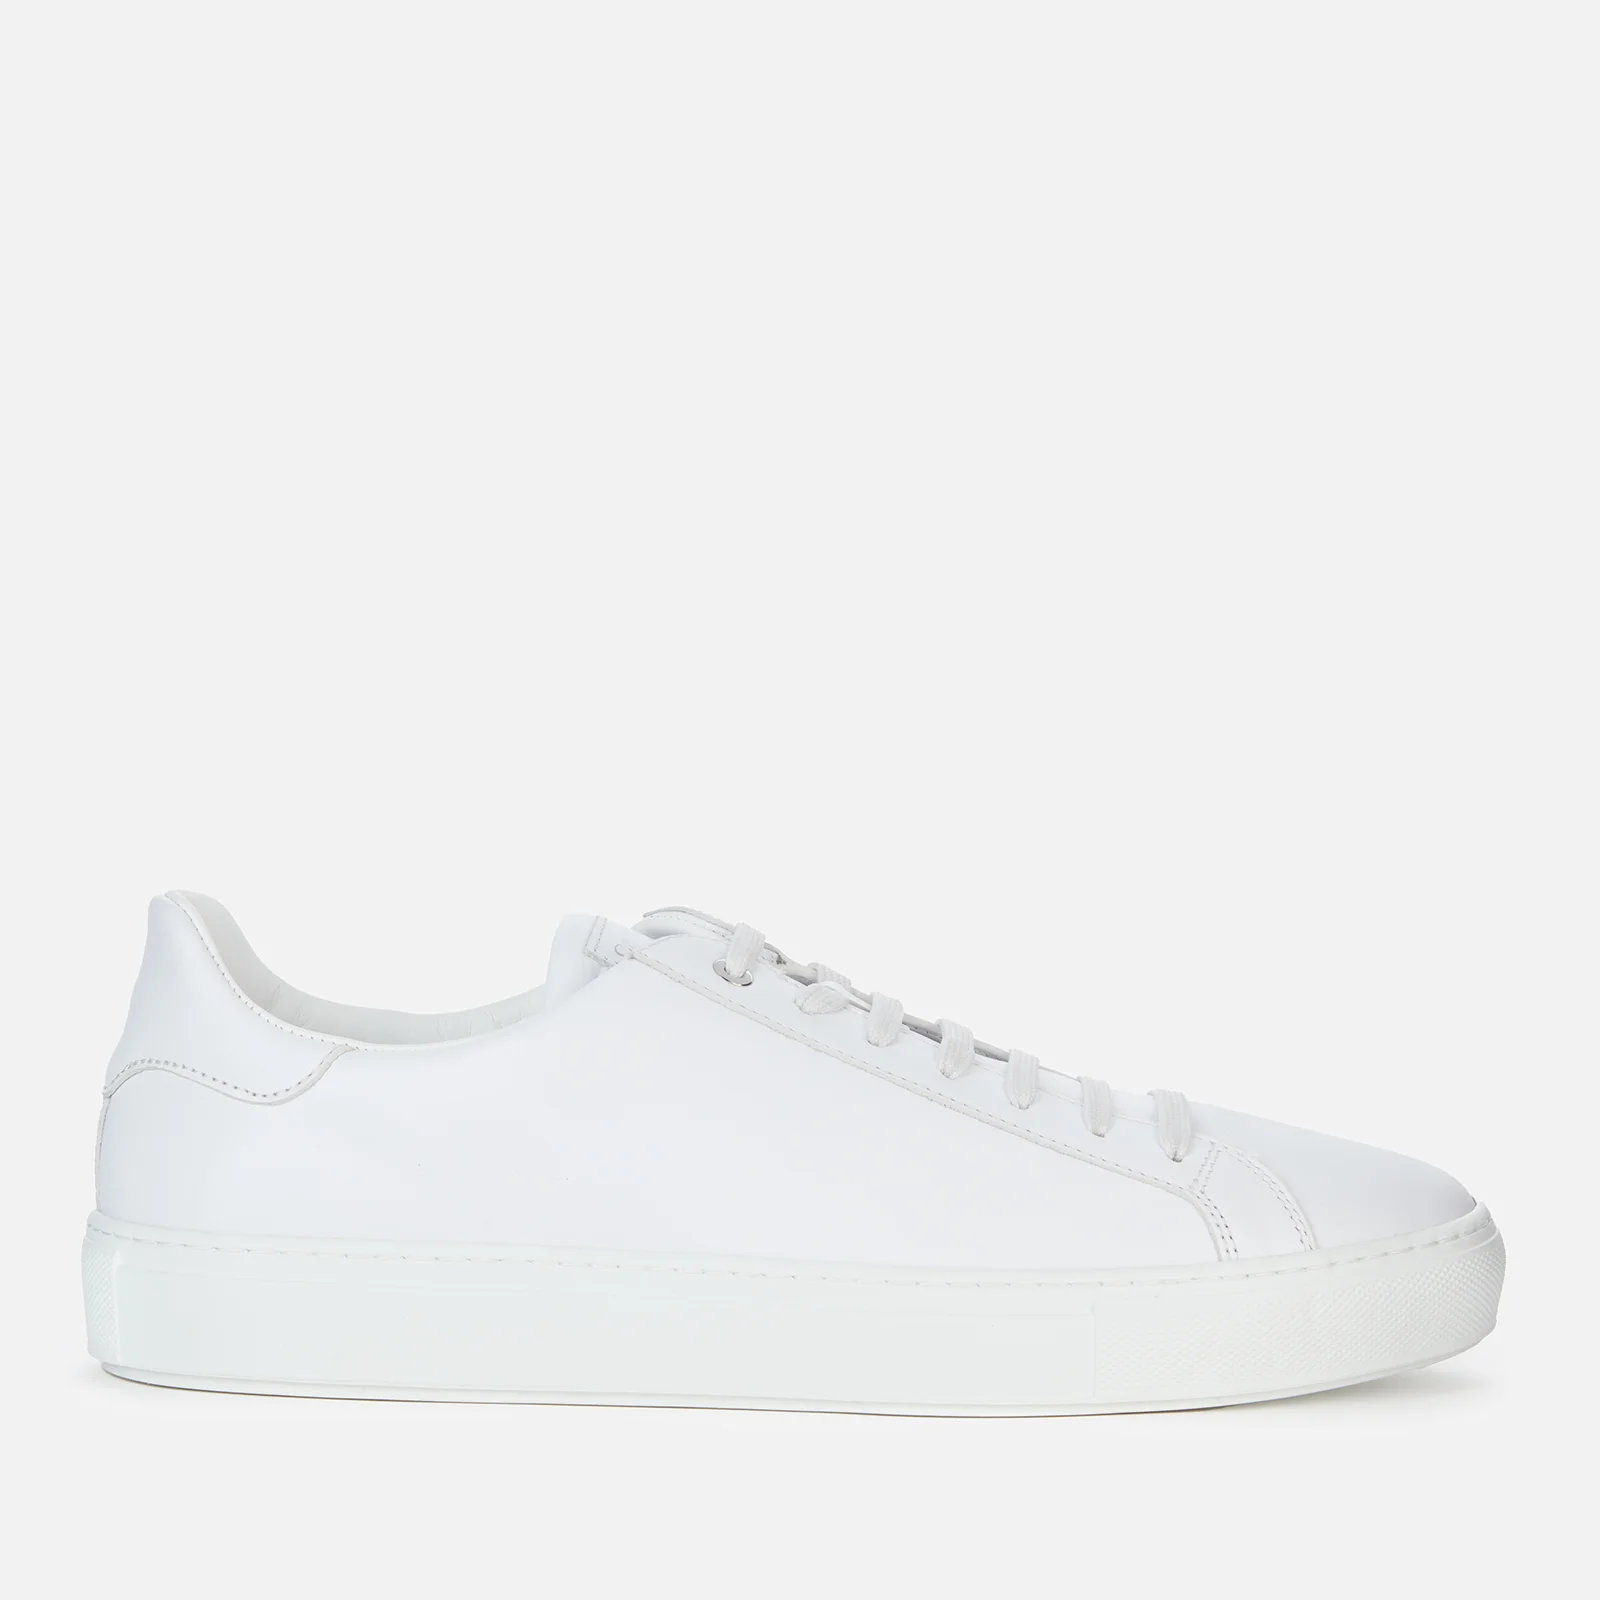 Canali Men's Lace Up Classic Leather Sneakers - White Image 1